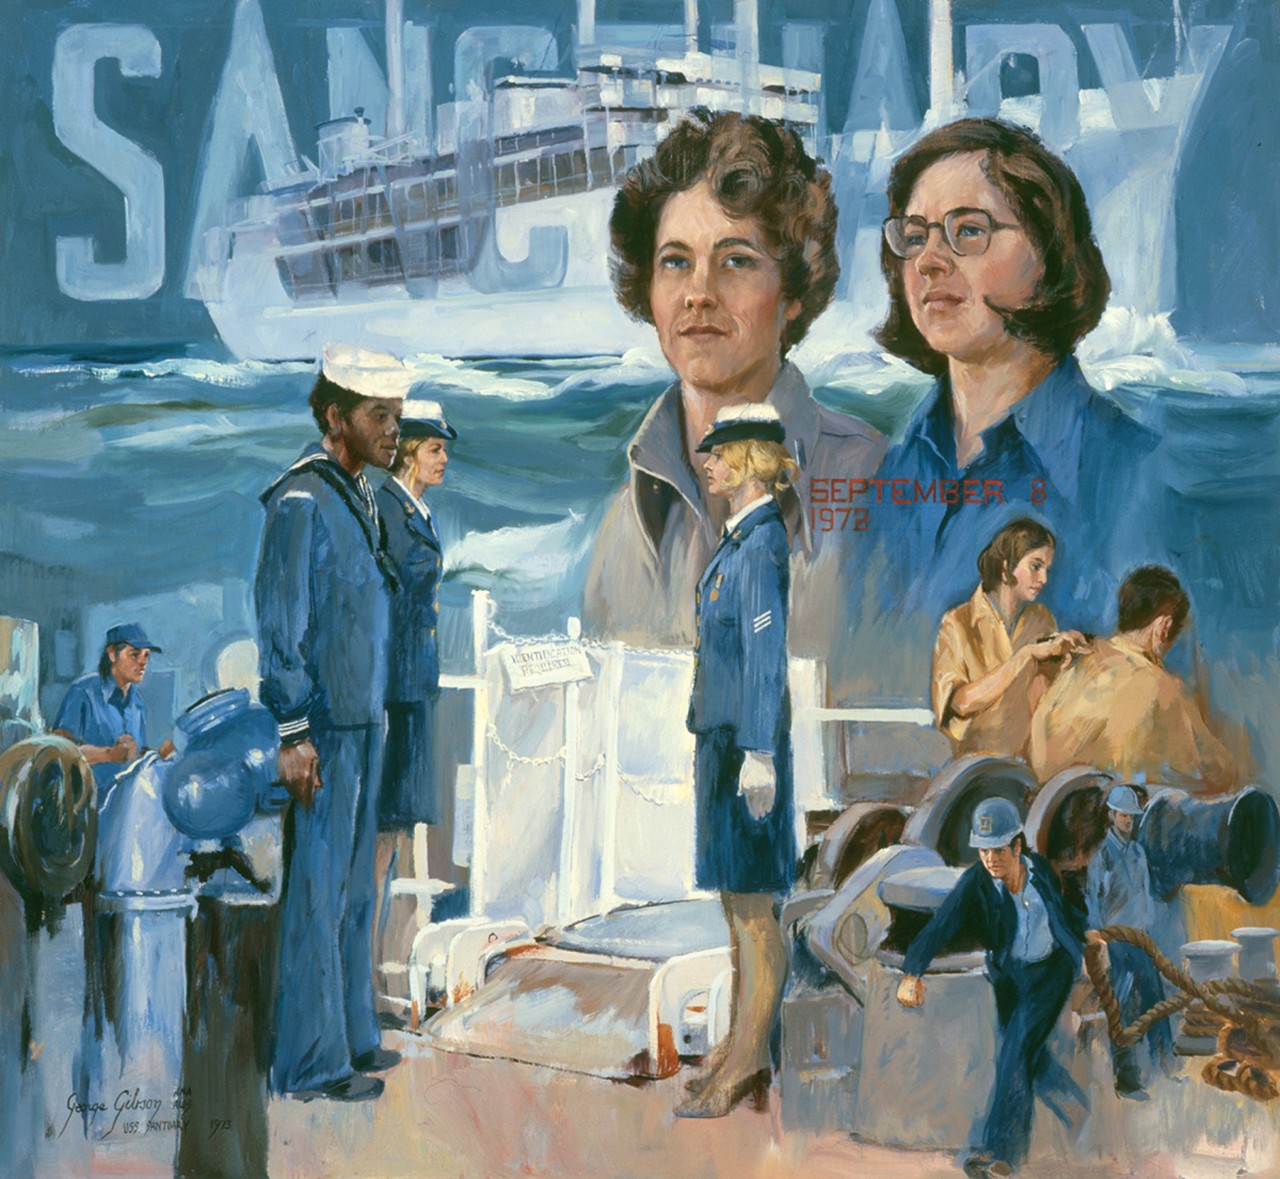 A montage of women and African Americans on USS Sanctuary